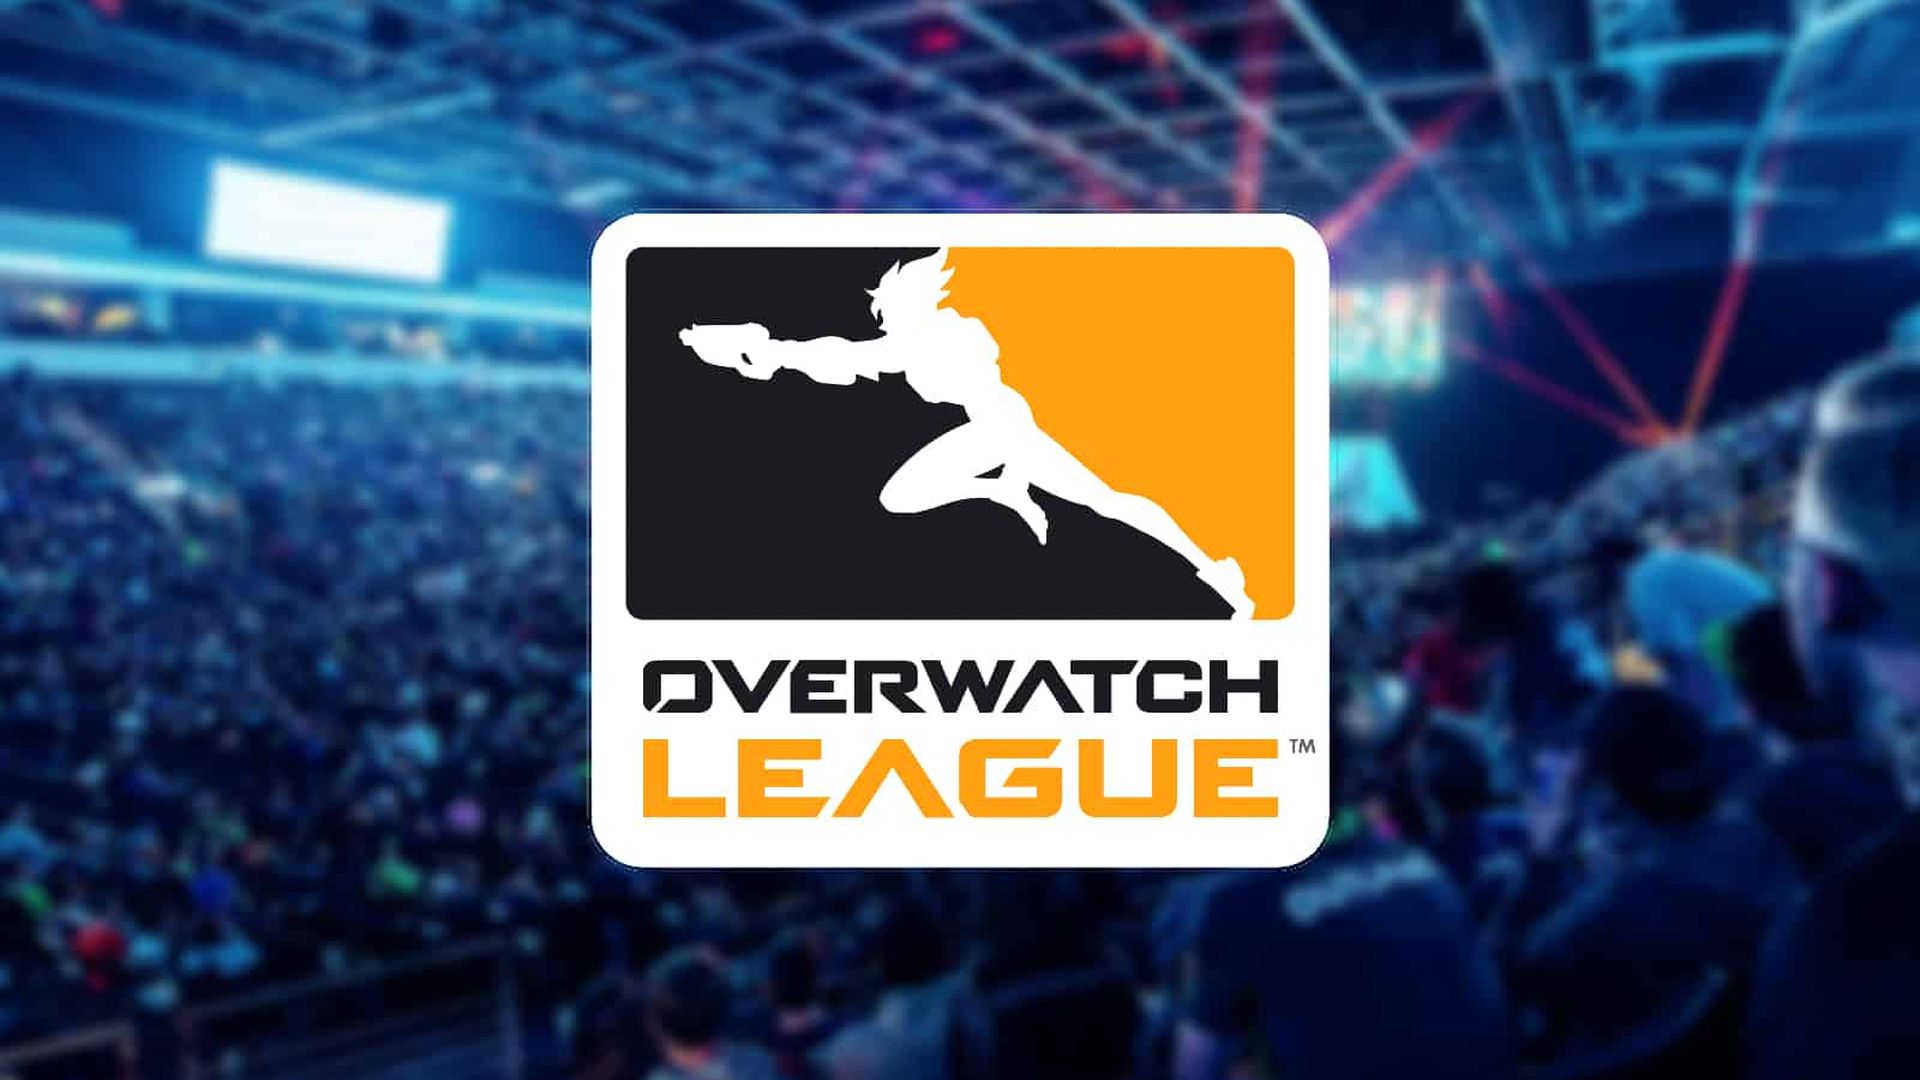 In this article, we are going to go over how to join Overwatch League, as well as all of the active Overwatch esports teams that are currently competing.